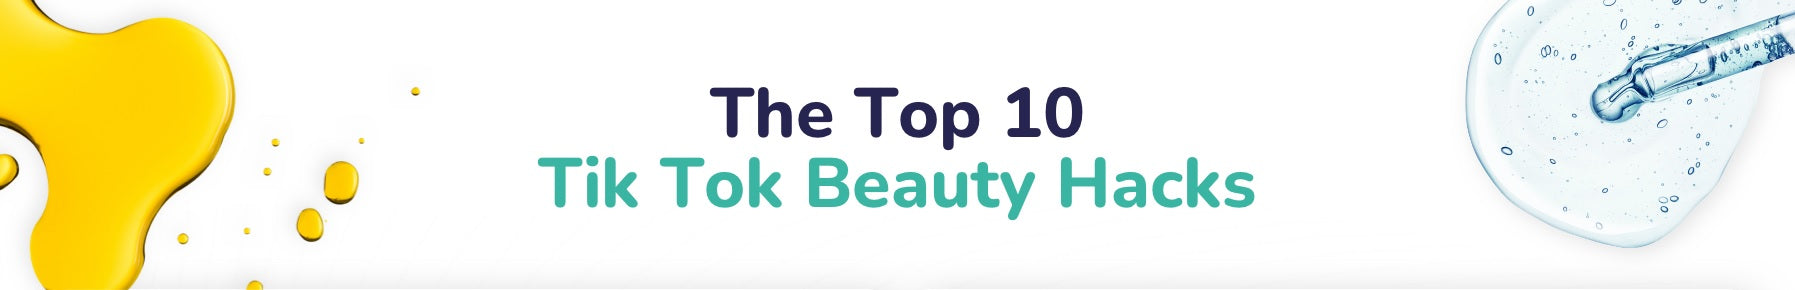 image with words top 10 beauty hacks 